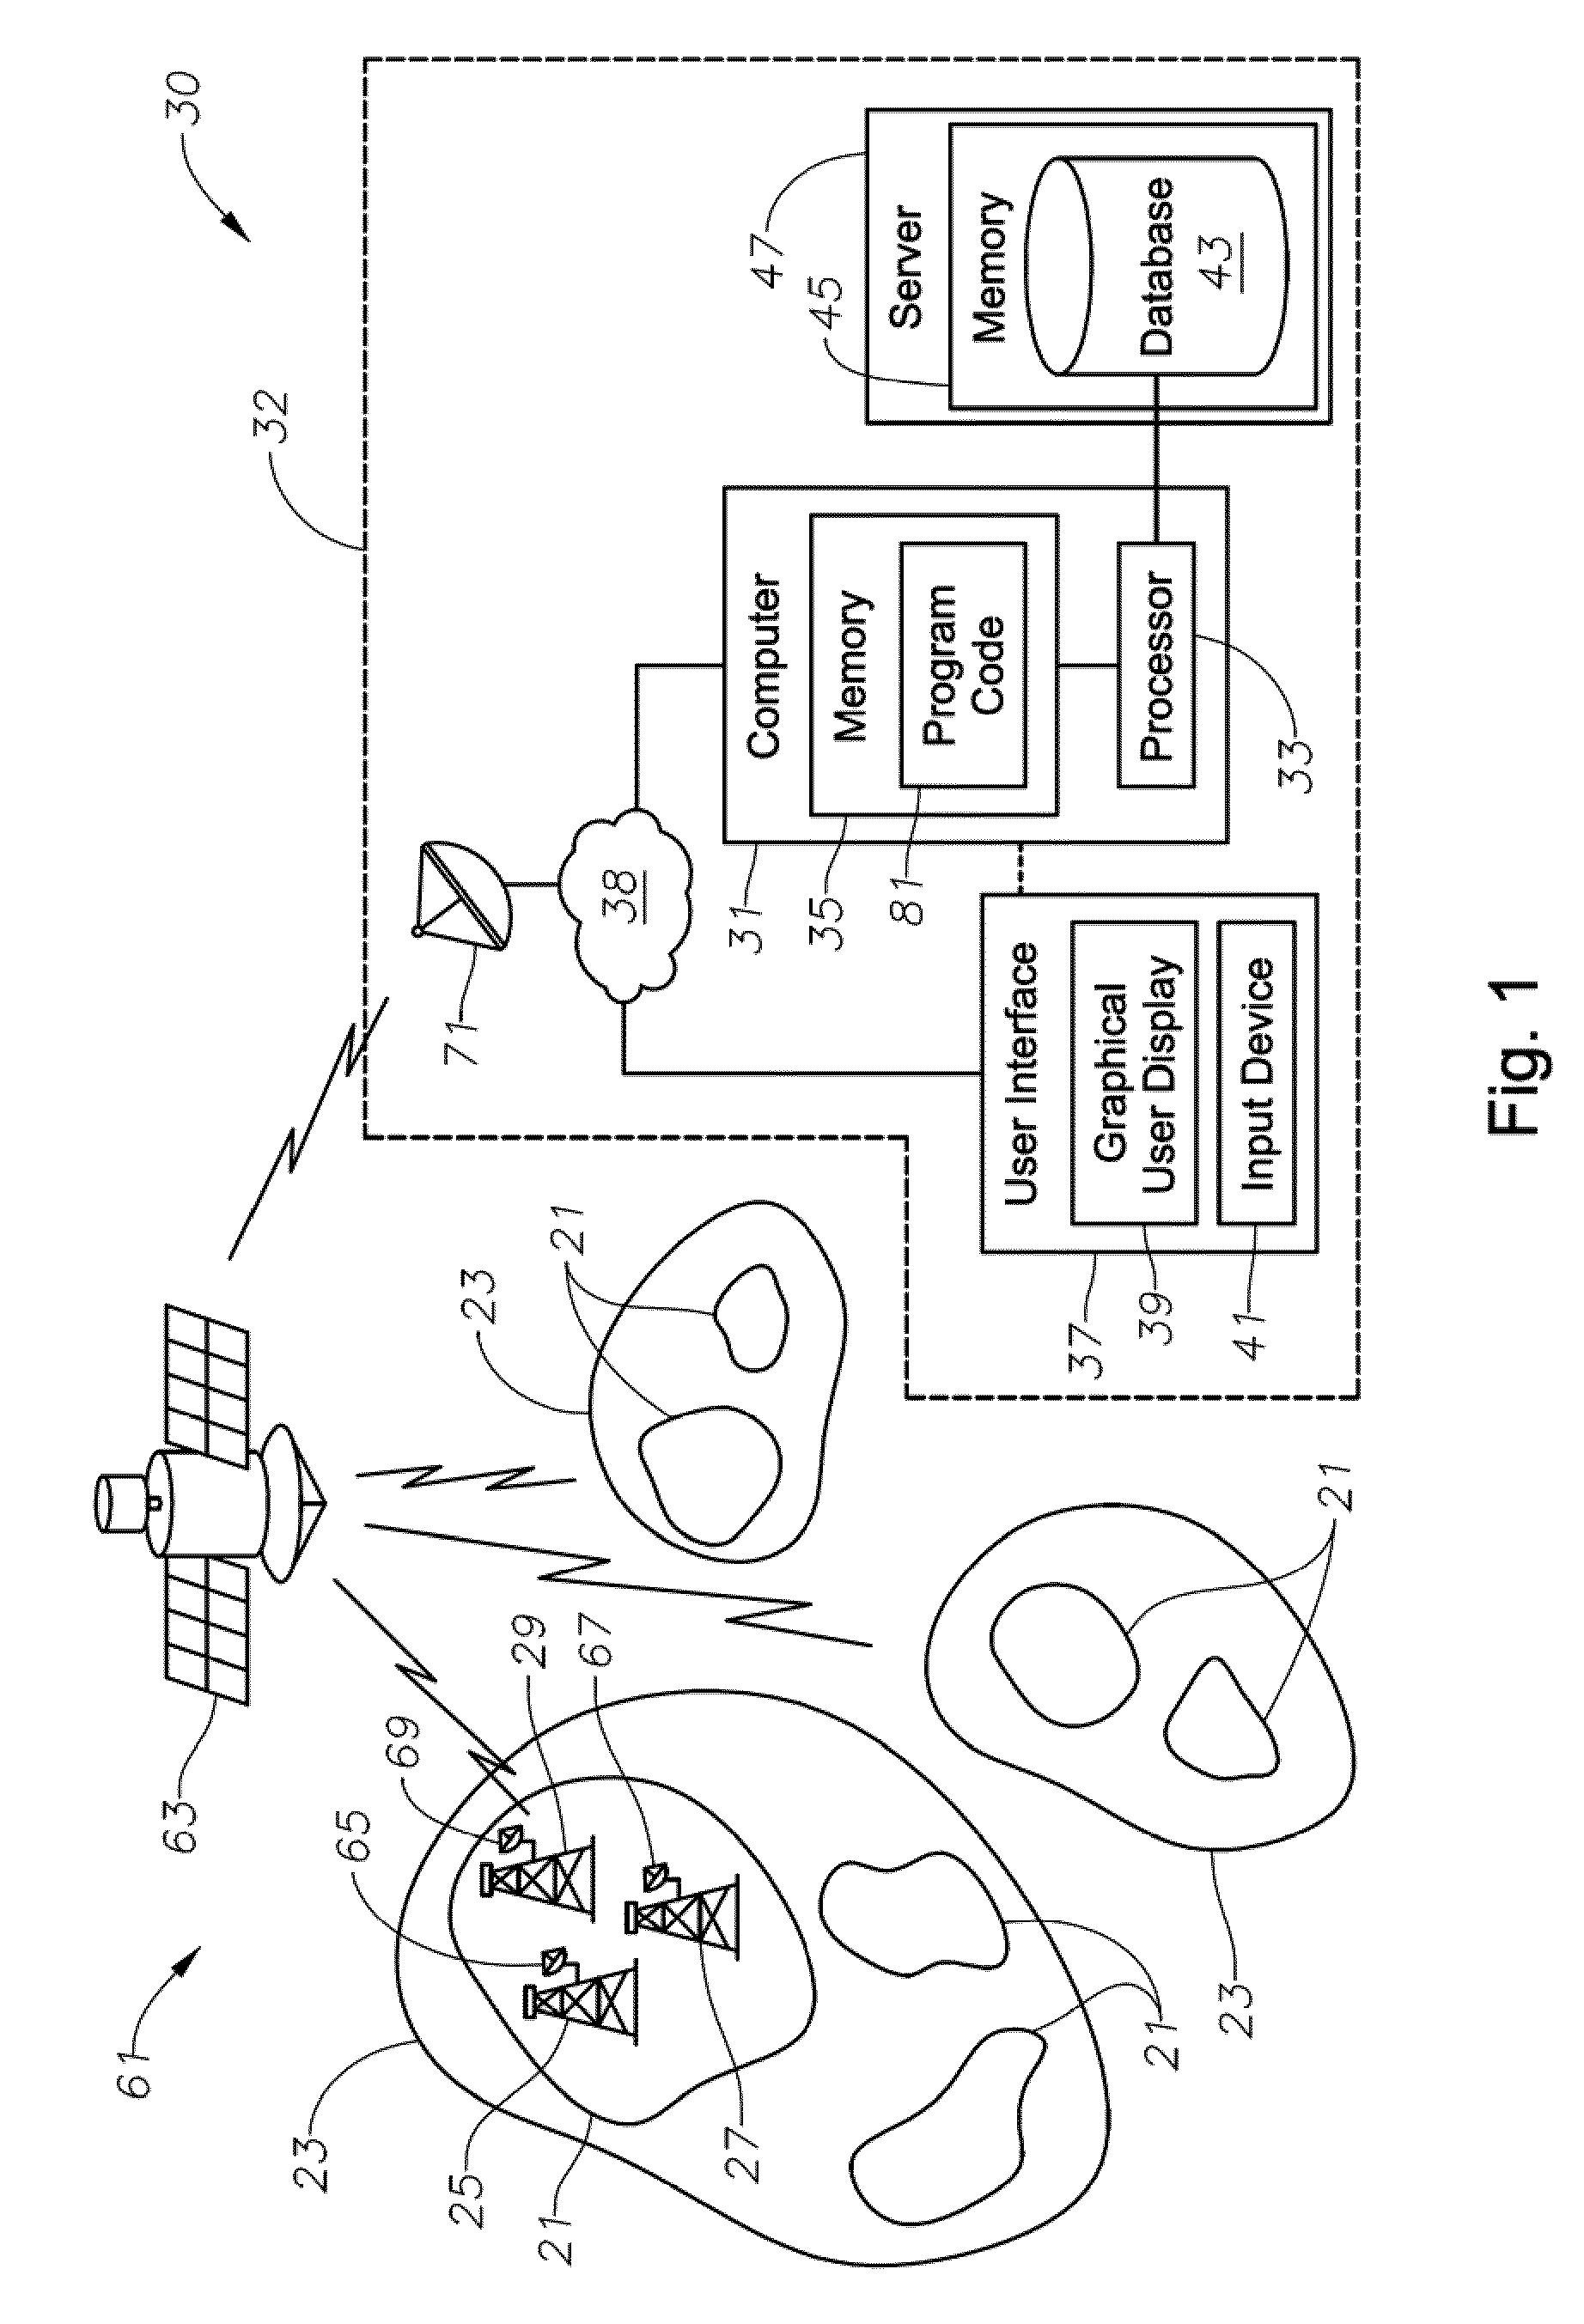 System, program product, and related methods for performing automated real-time reservoir pressure estimation enabling optimized injection and production strategies